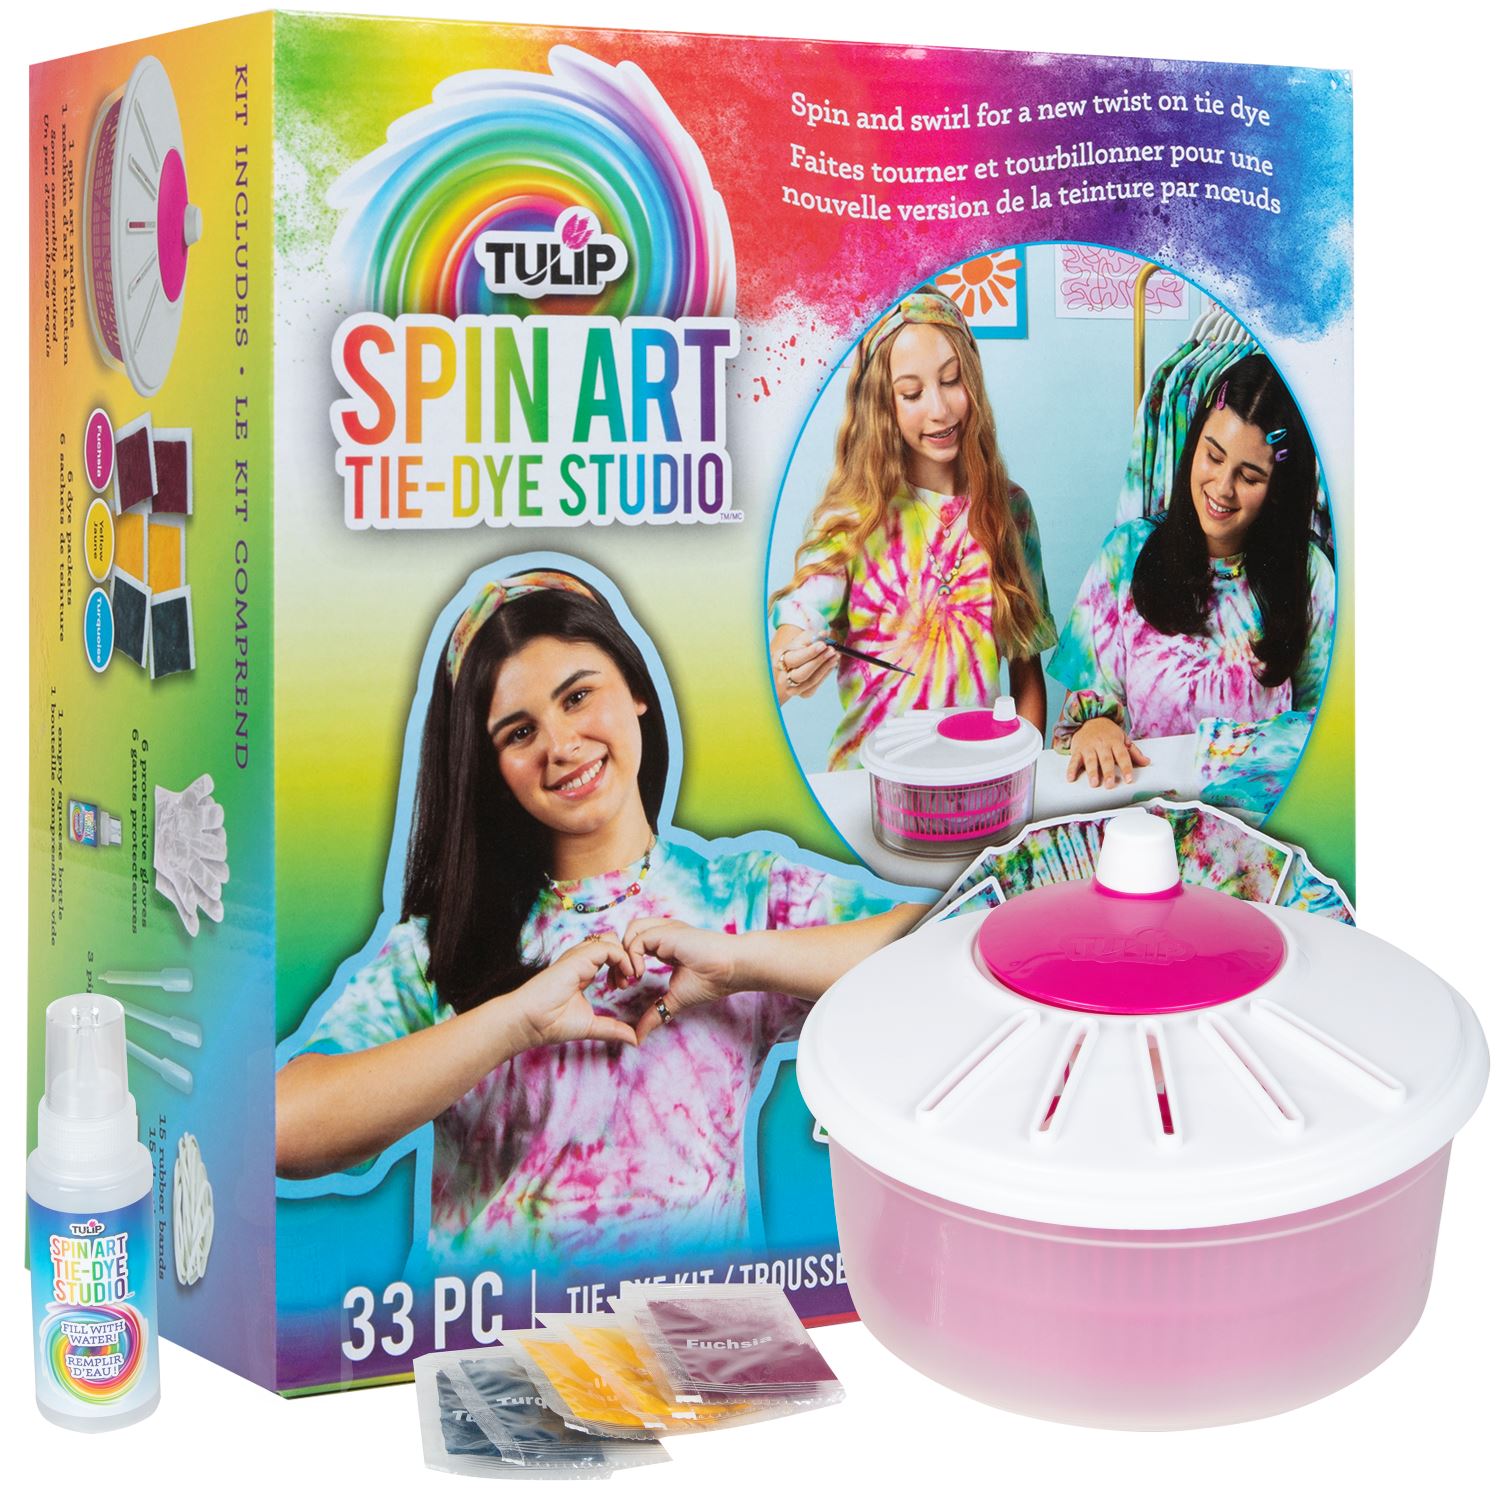 Tulip One-Step Tie-Dye Spin Art Kit, Fashion DIY with Fabric Dye, Fun Activity for All, Vibrant Classic Colors, Kids Age 8+